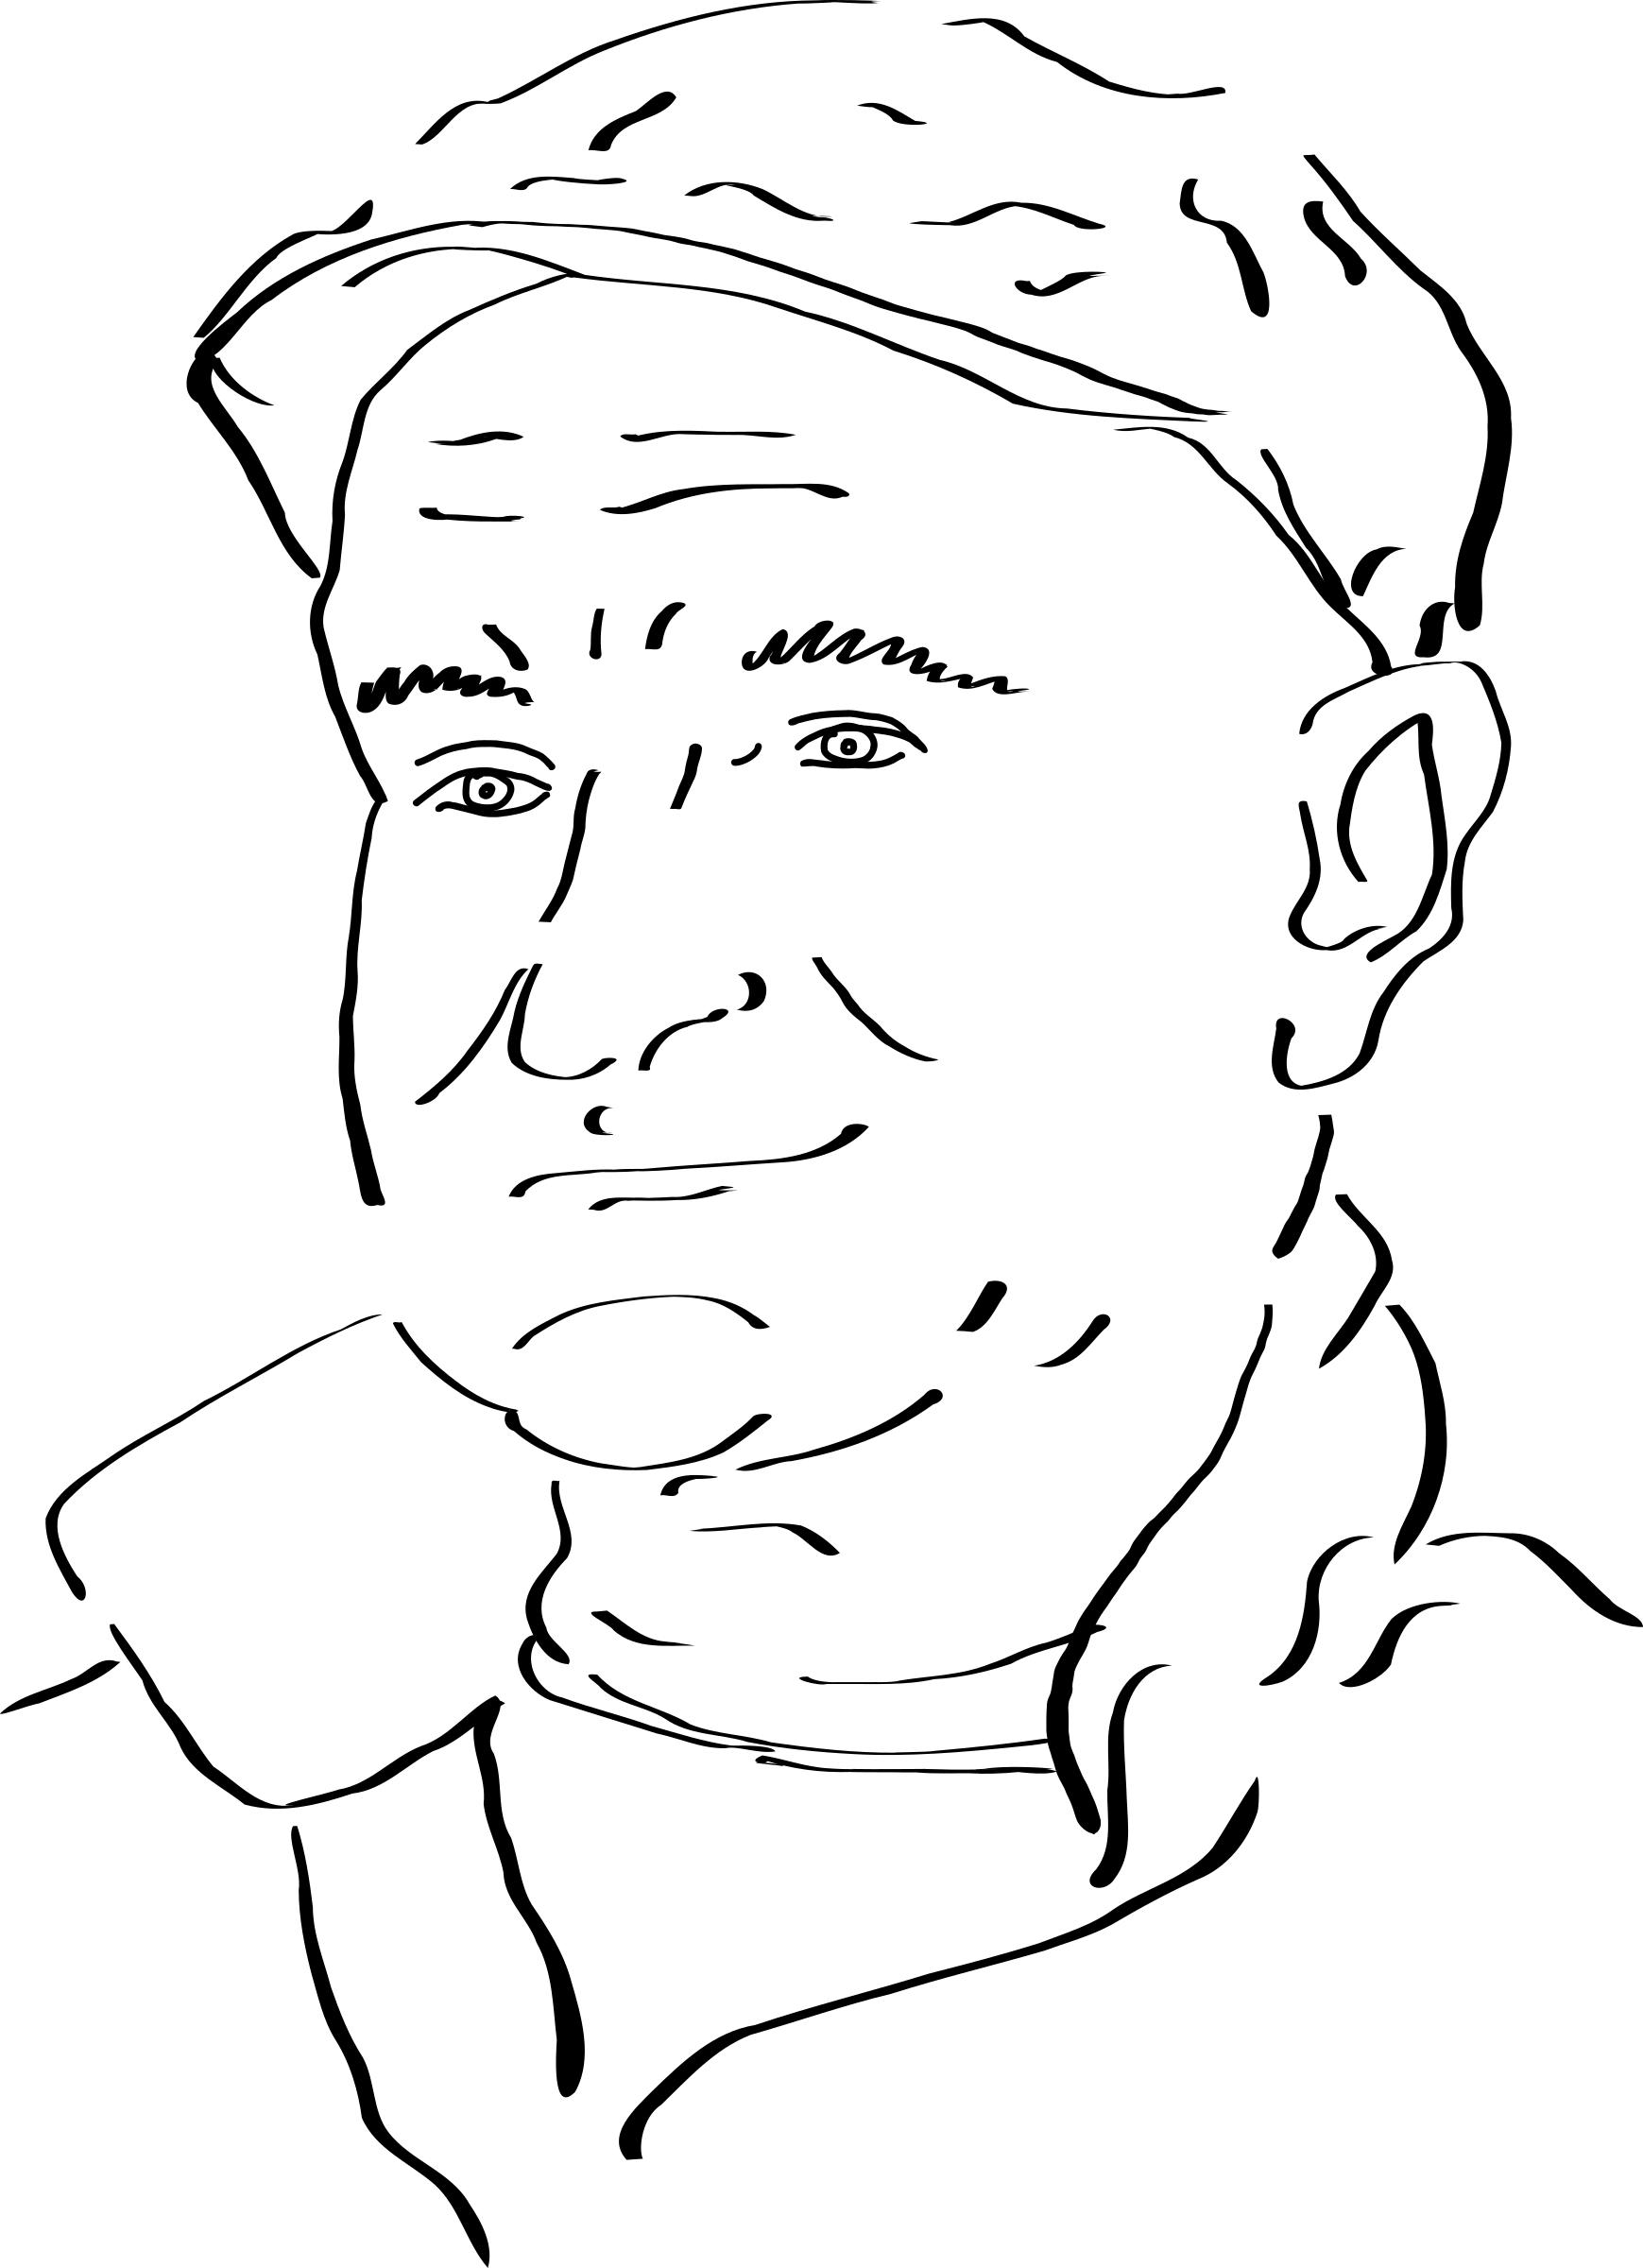 Robin Williams png